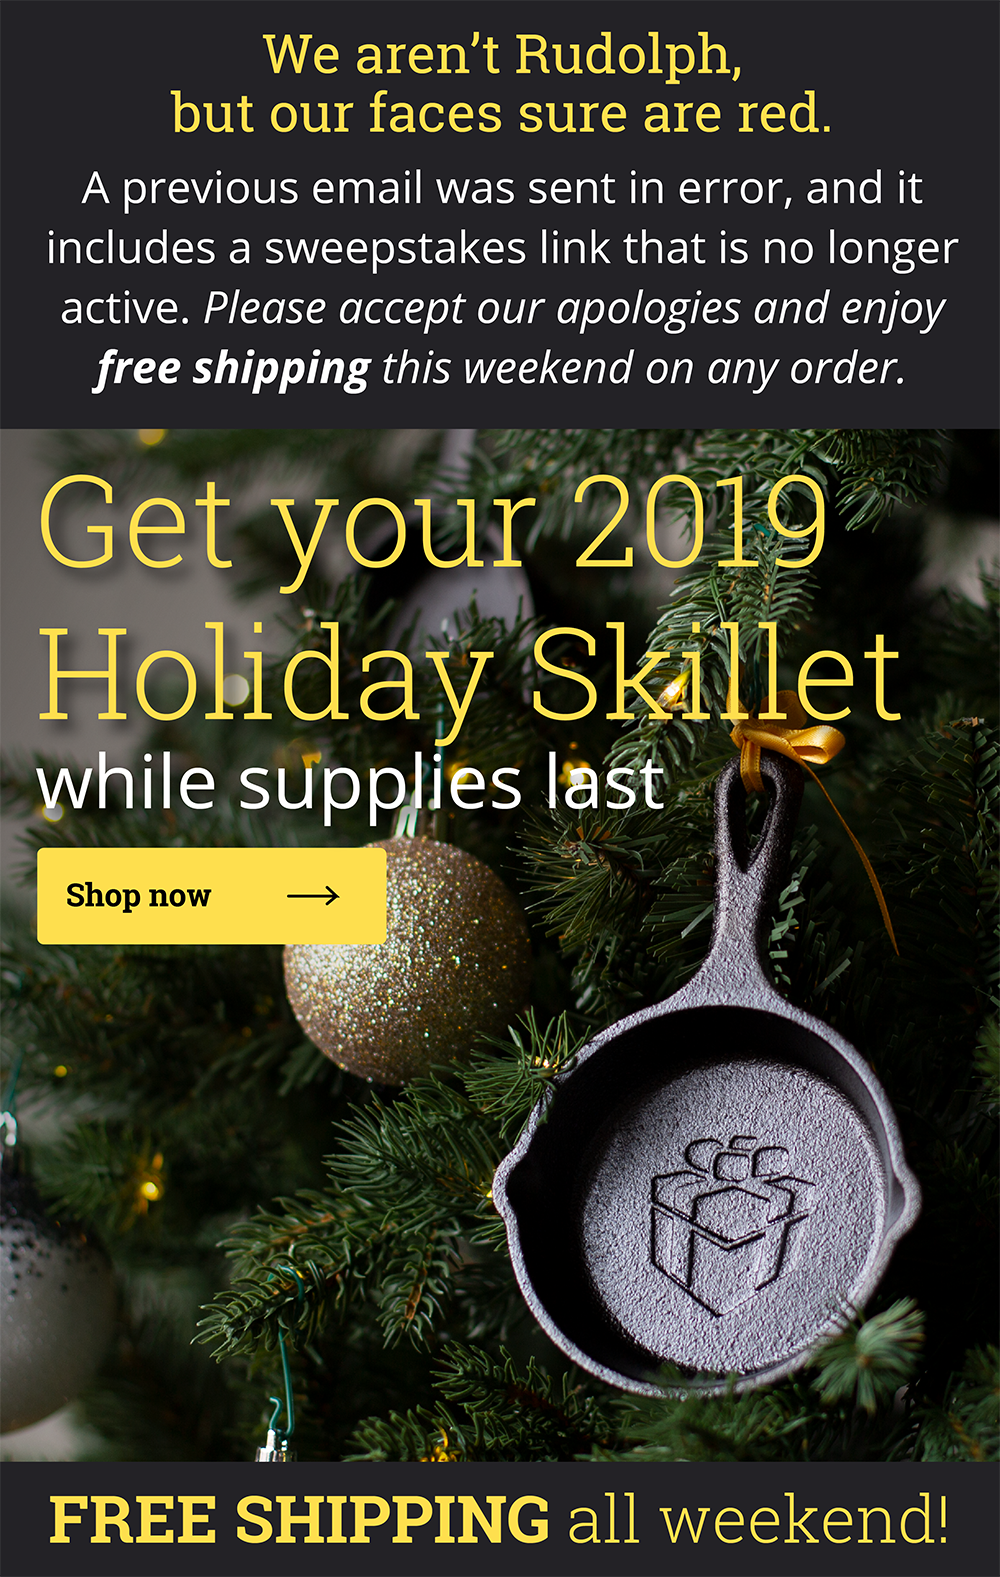 Get your 2019 Holiday Skillet while supplies last!